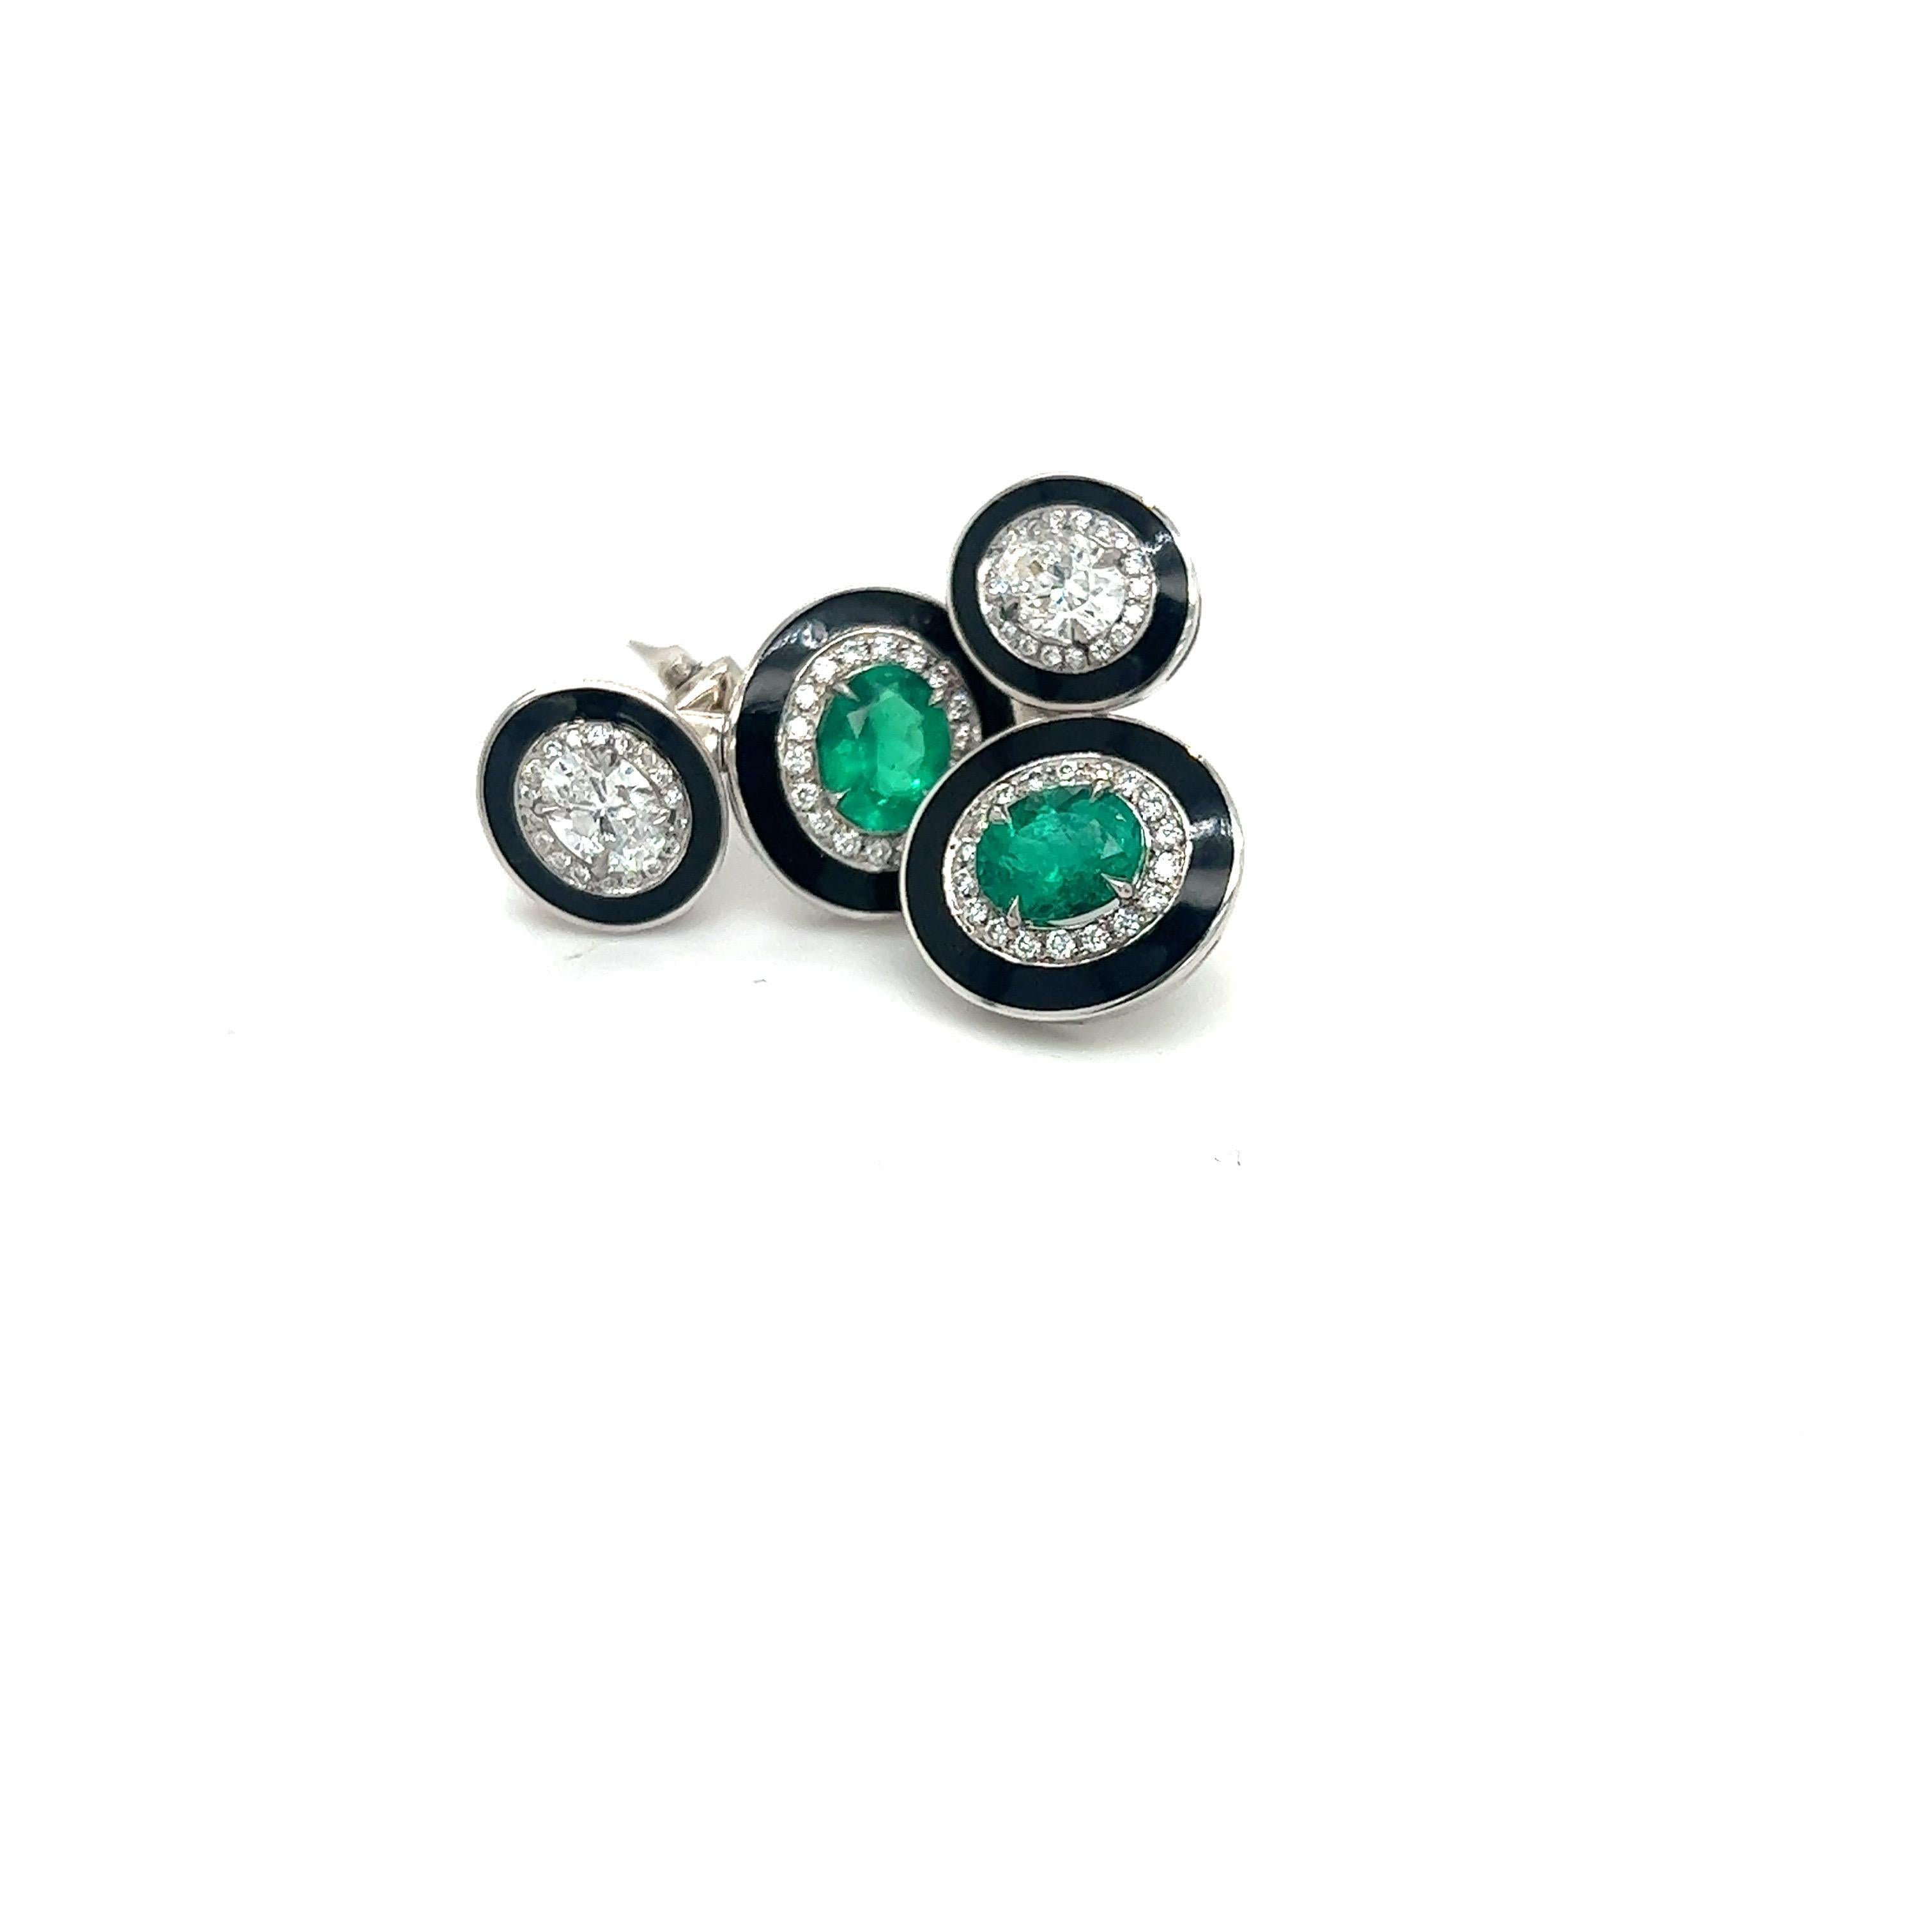 Art Deco inspired  18 karat white gold earrings, beautifully crafted with round brilliant diamonds and oval emeralds. Each center stone is bordered with  pave diamonds and black enamel. The earrings are pierced with a post and french clip which can